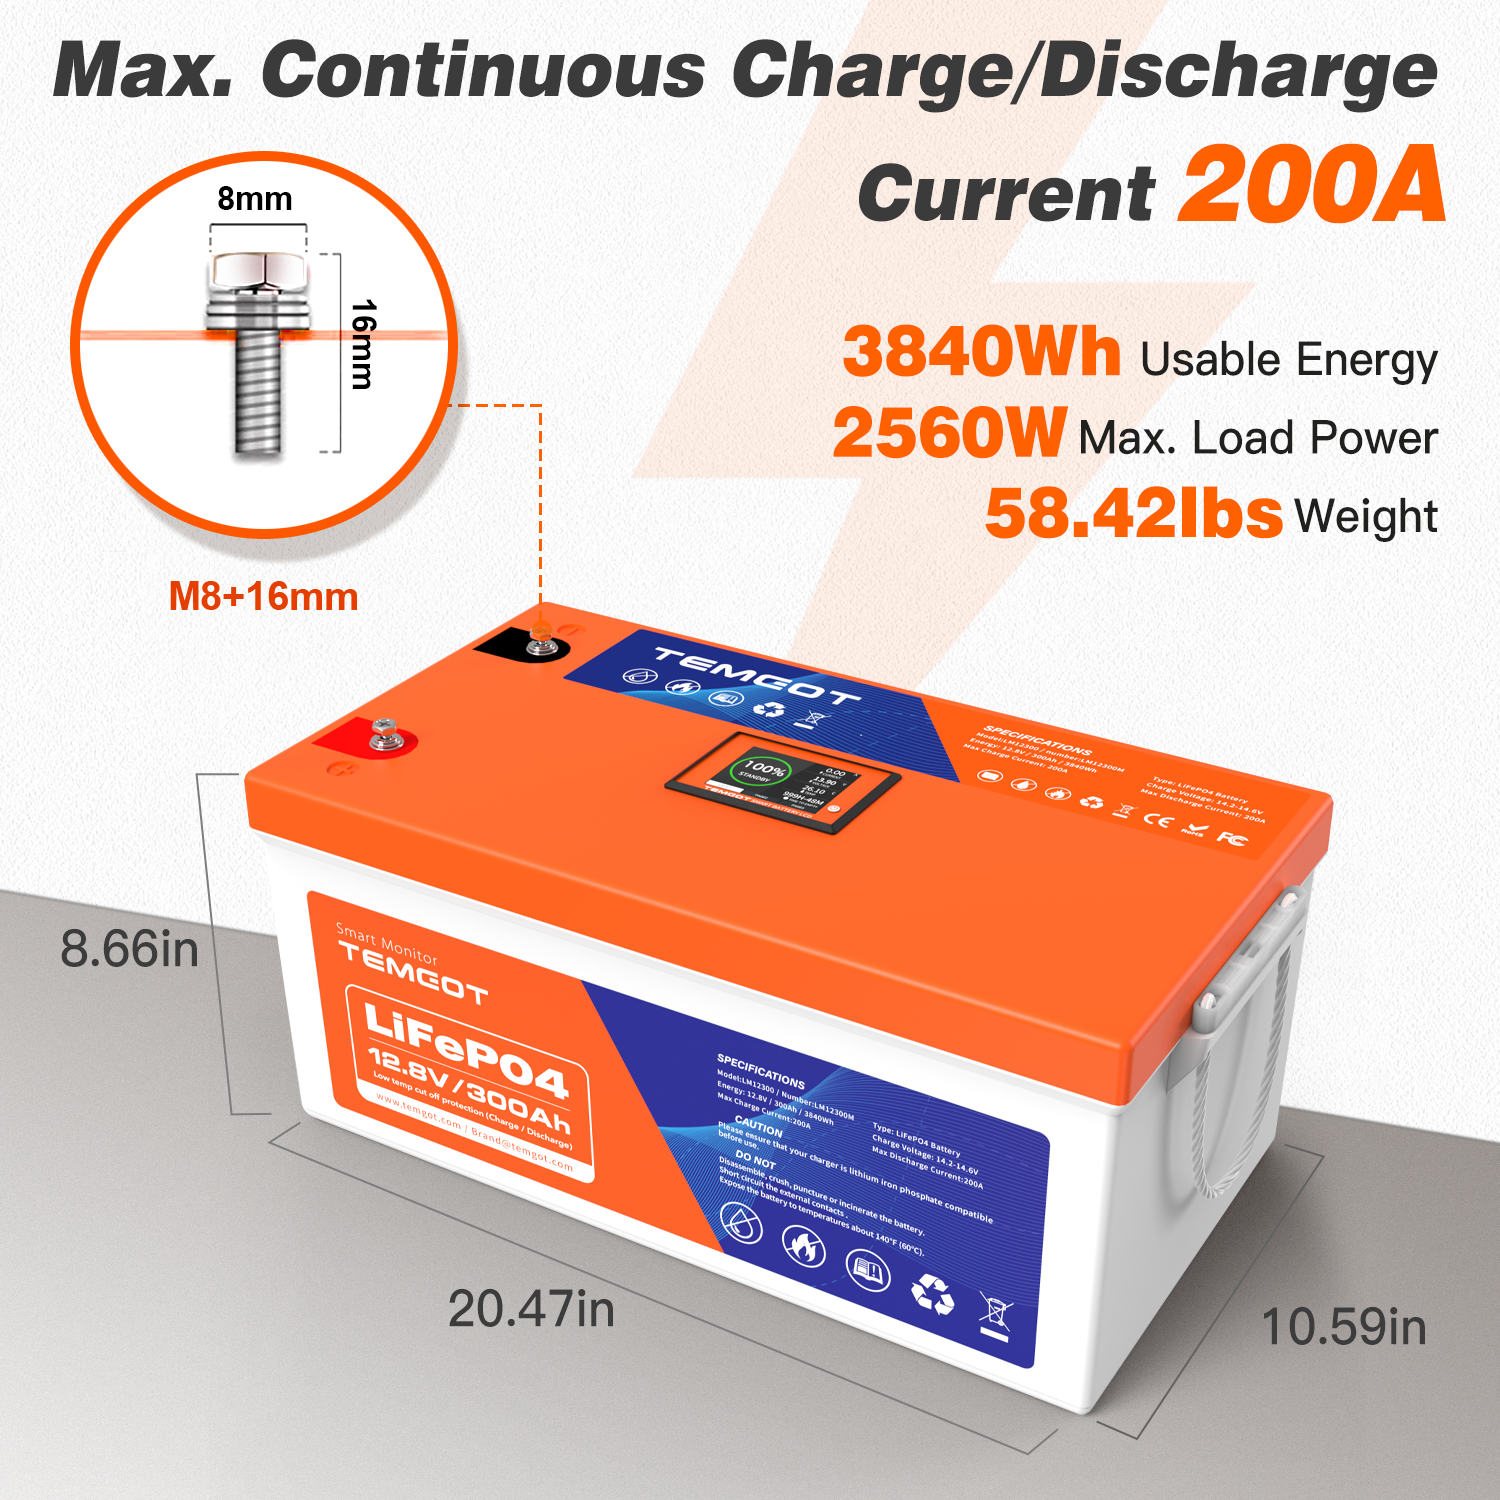 12V 100AH Bluetooth LiFePO4 Lithium Battery with Self-Heating, Built-in  100A BMS, Supports Low Temp Charging(-4°F), 5000+ Cycles, Perfect for